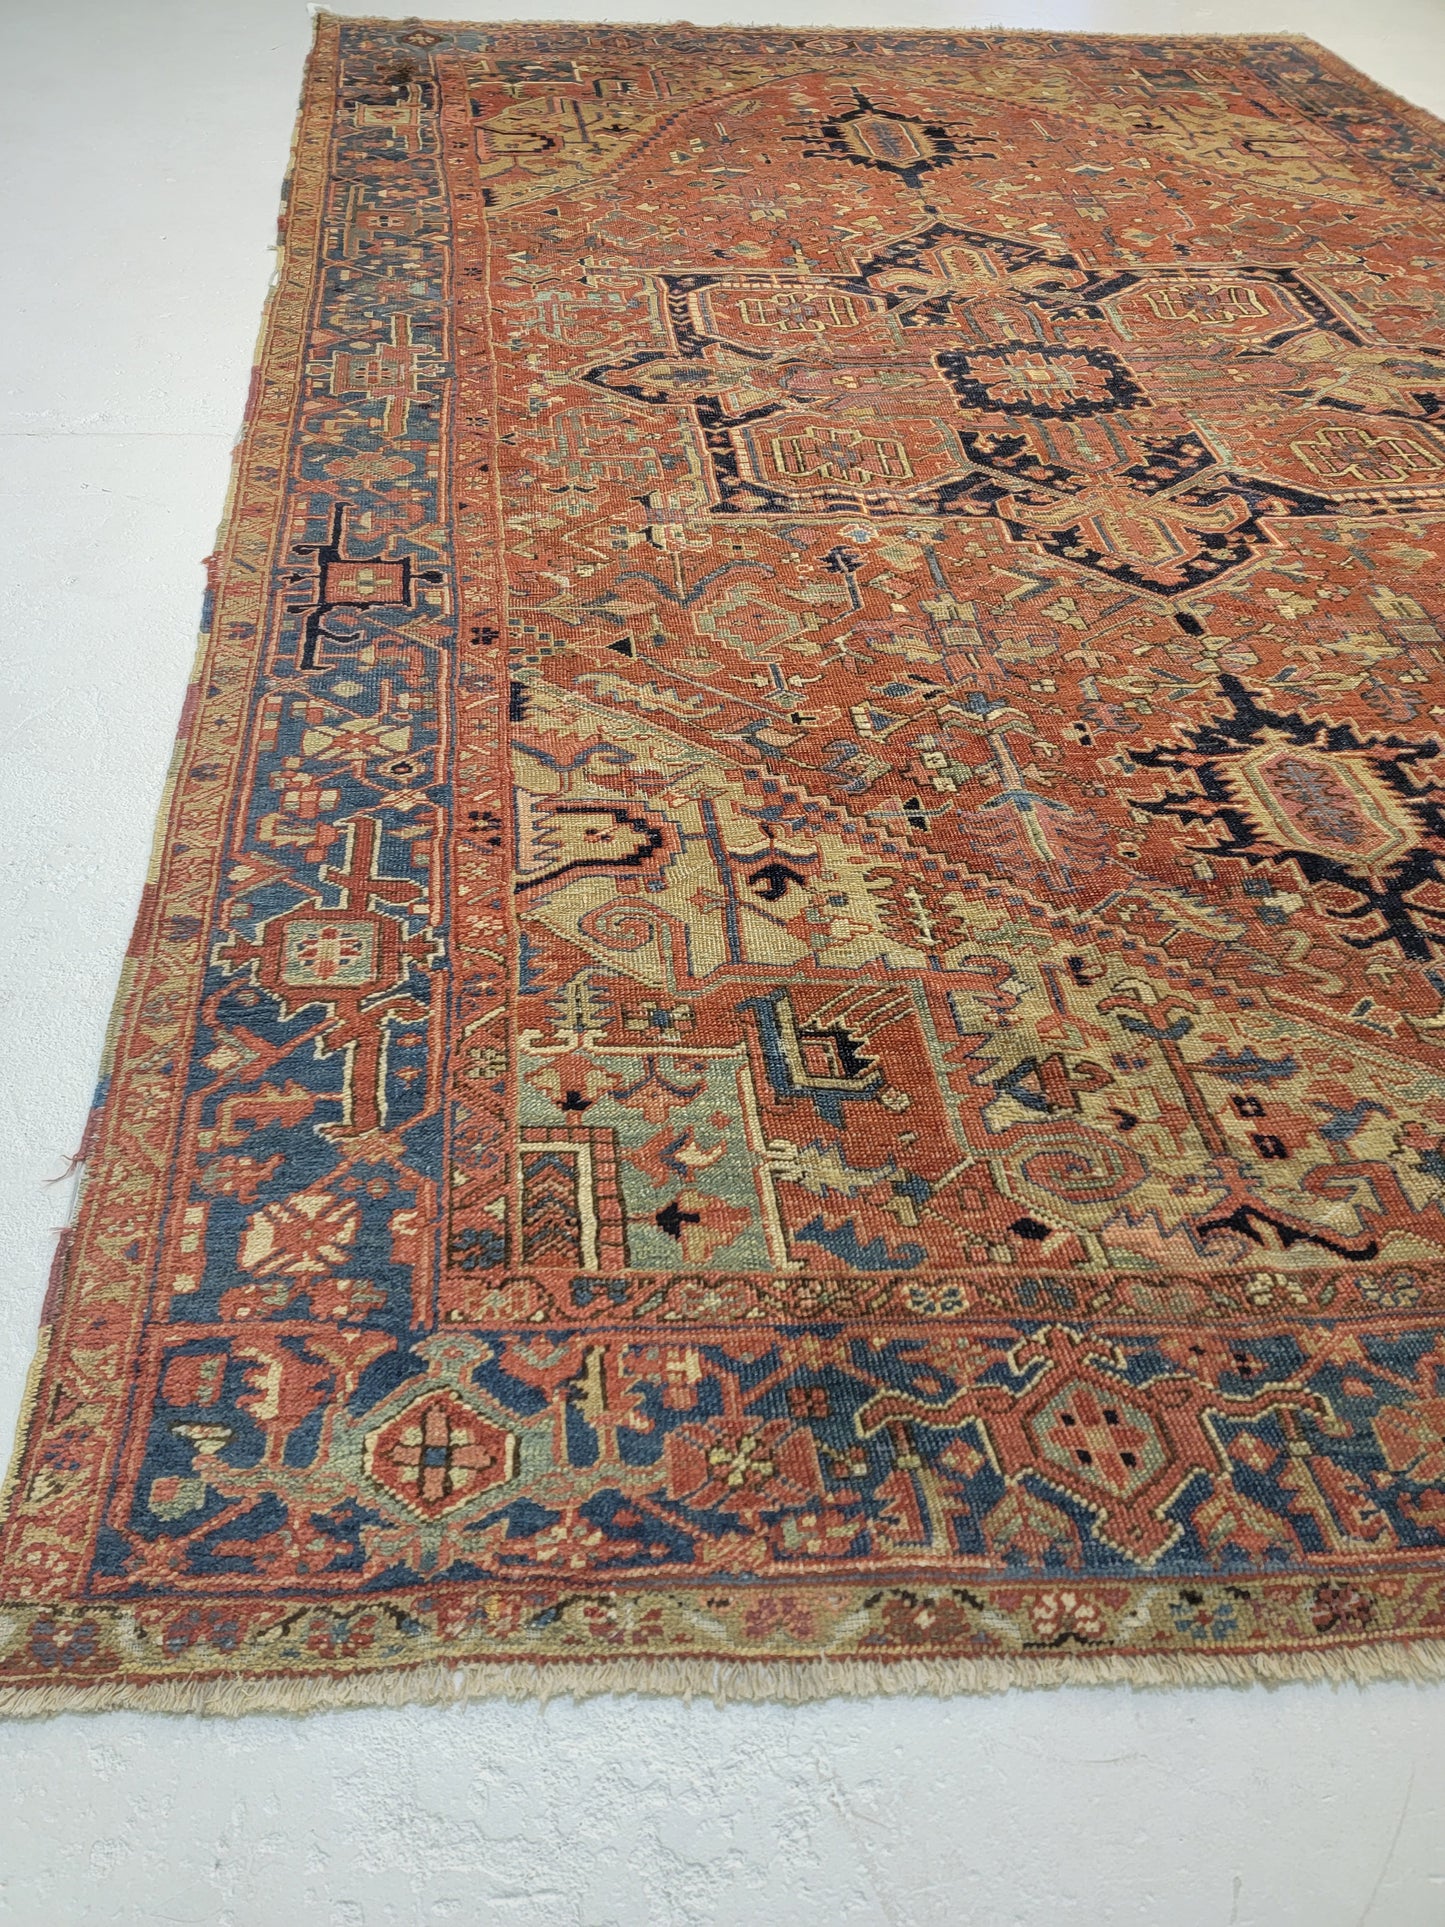 Antique Hand-Knotted Wool Area Rug Heriz Serapi 8'2" x 11'11"